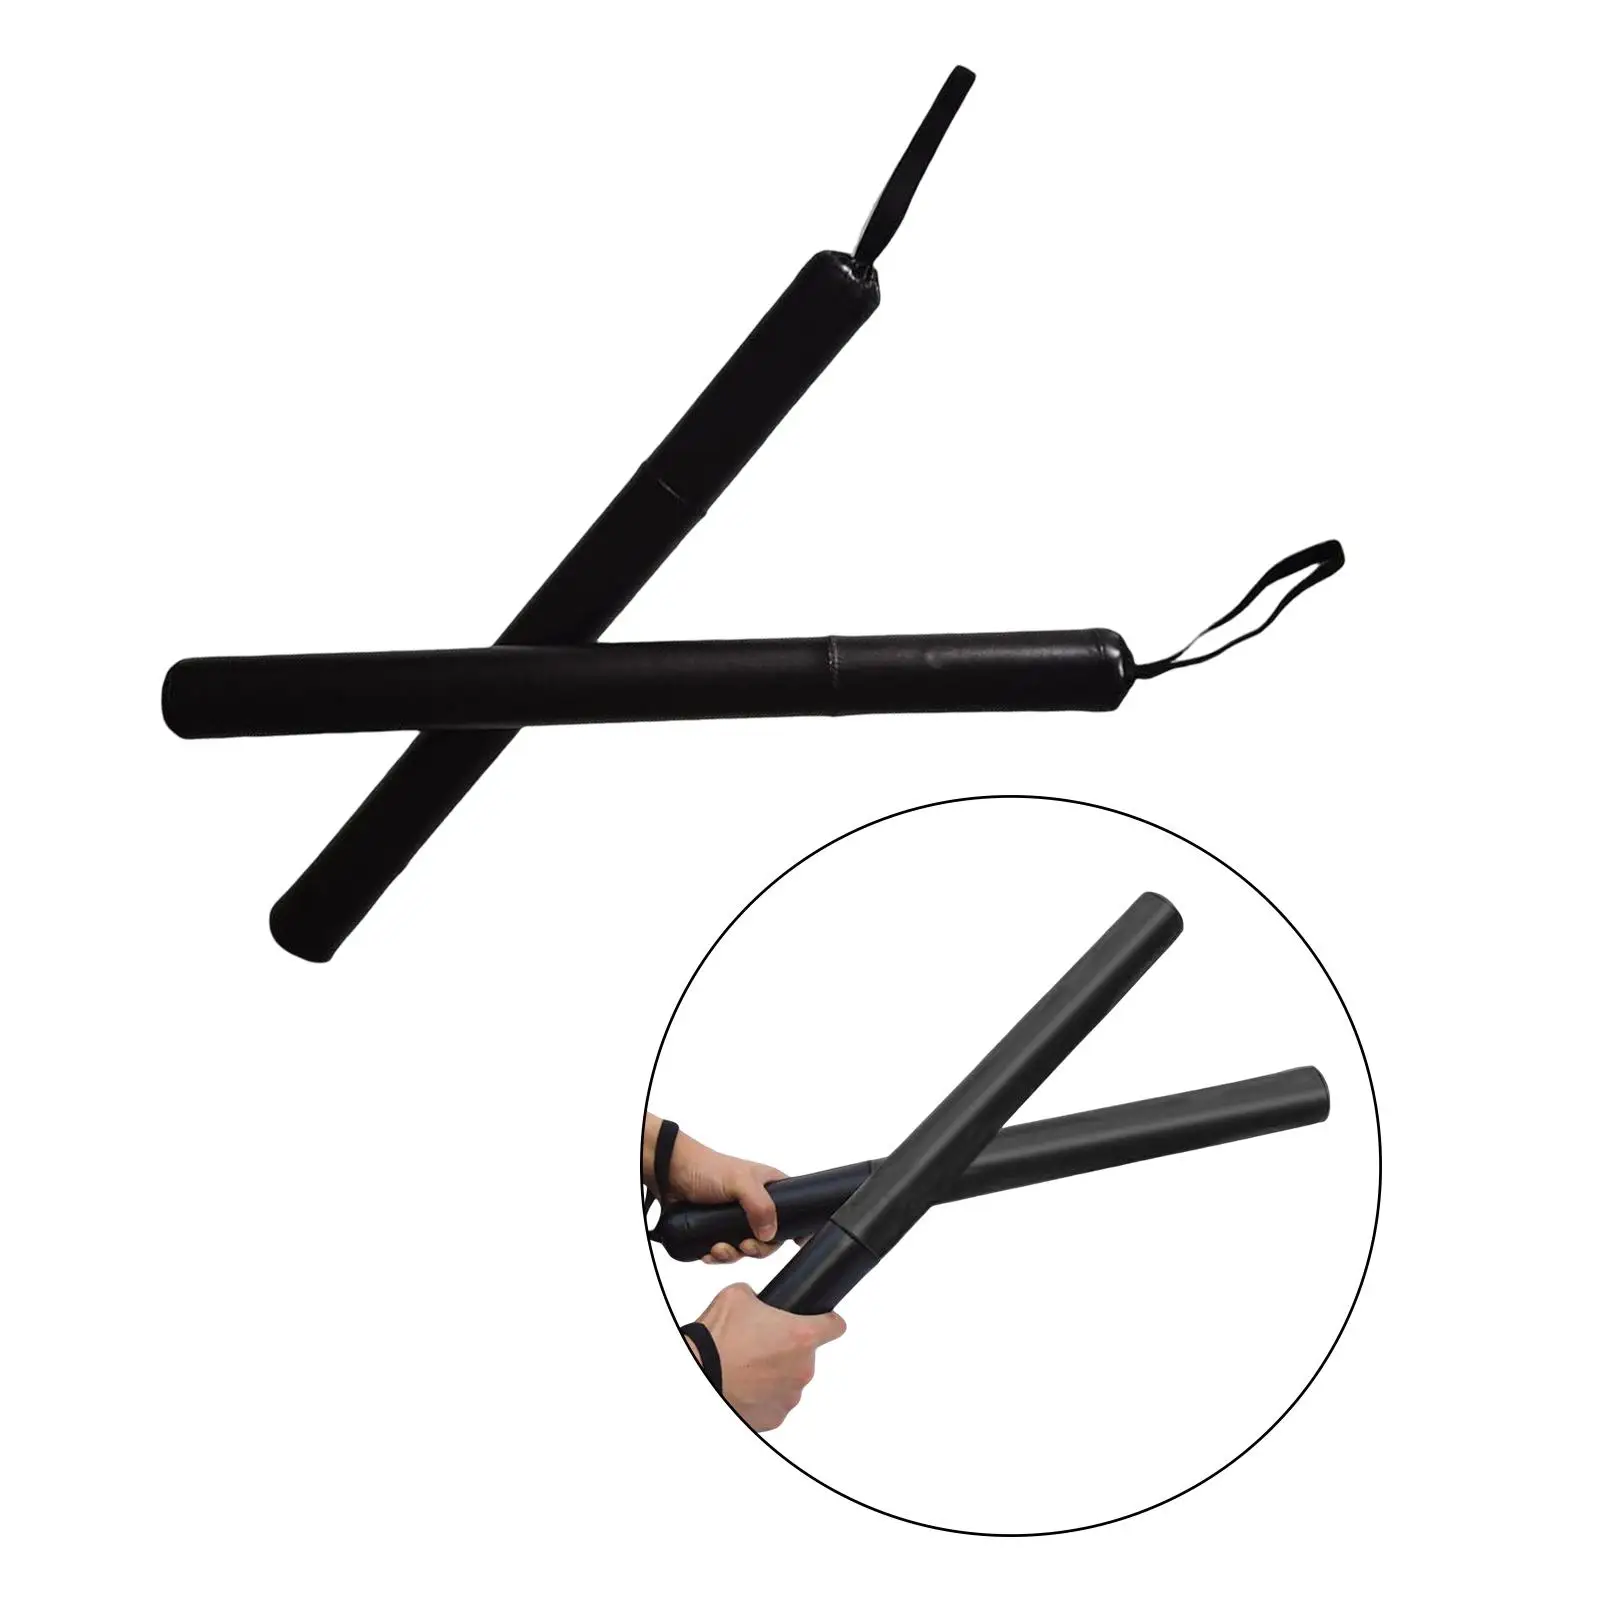 Boxing Training Sticks Padded Contact Sticks Punch Foam Sticks for Reaction